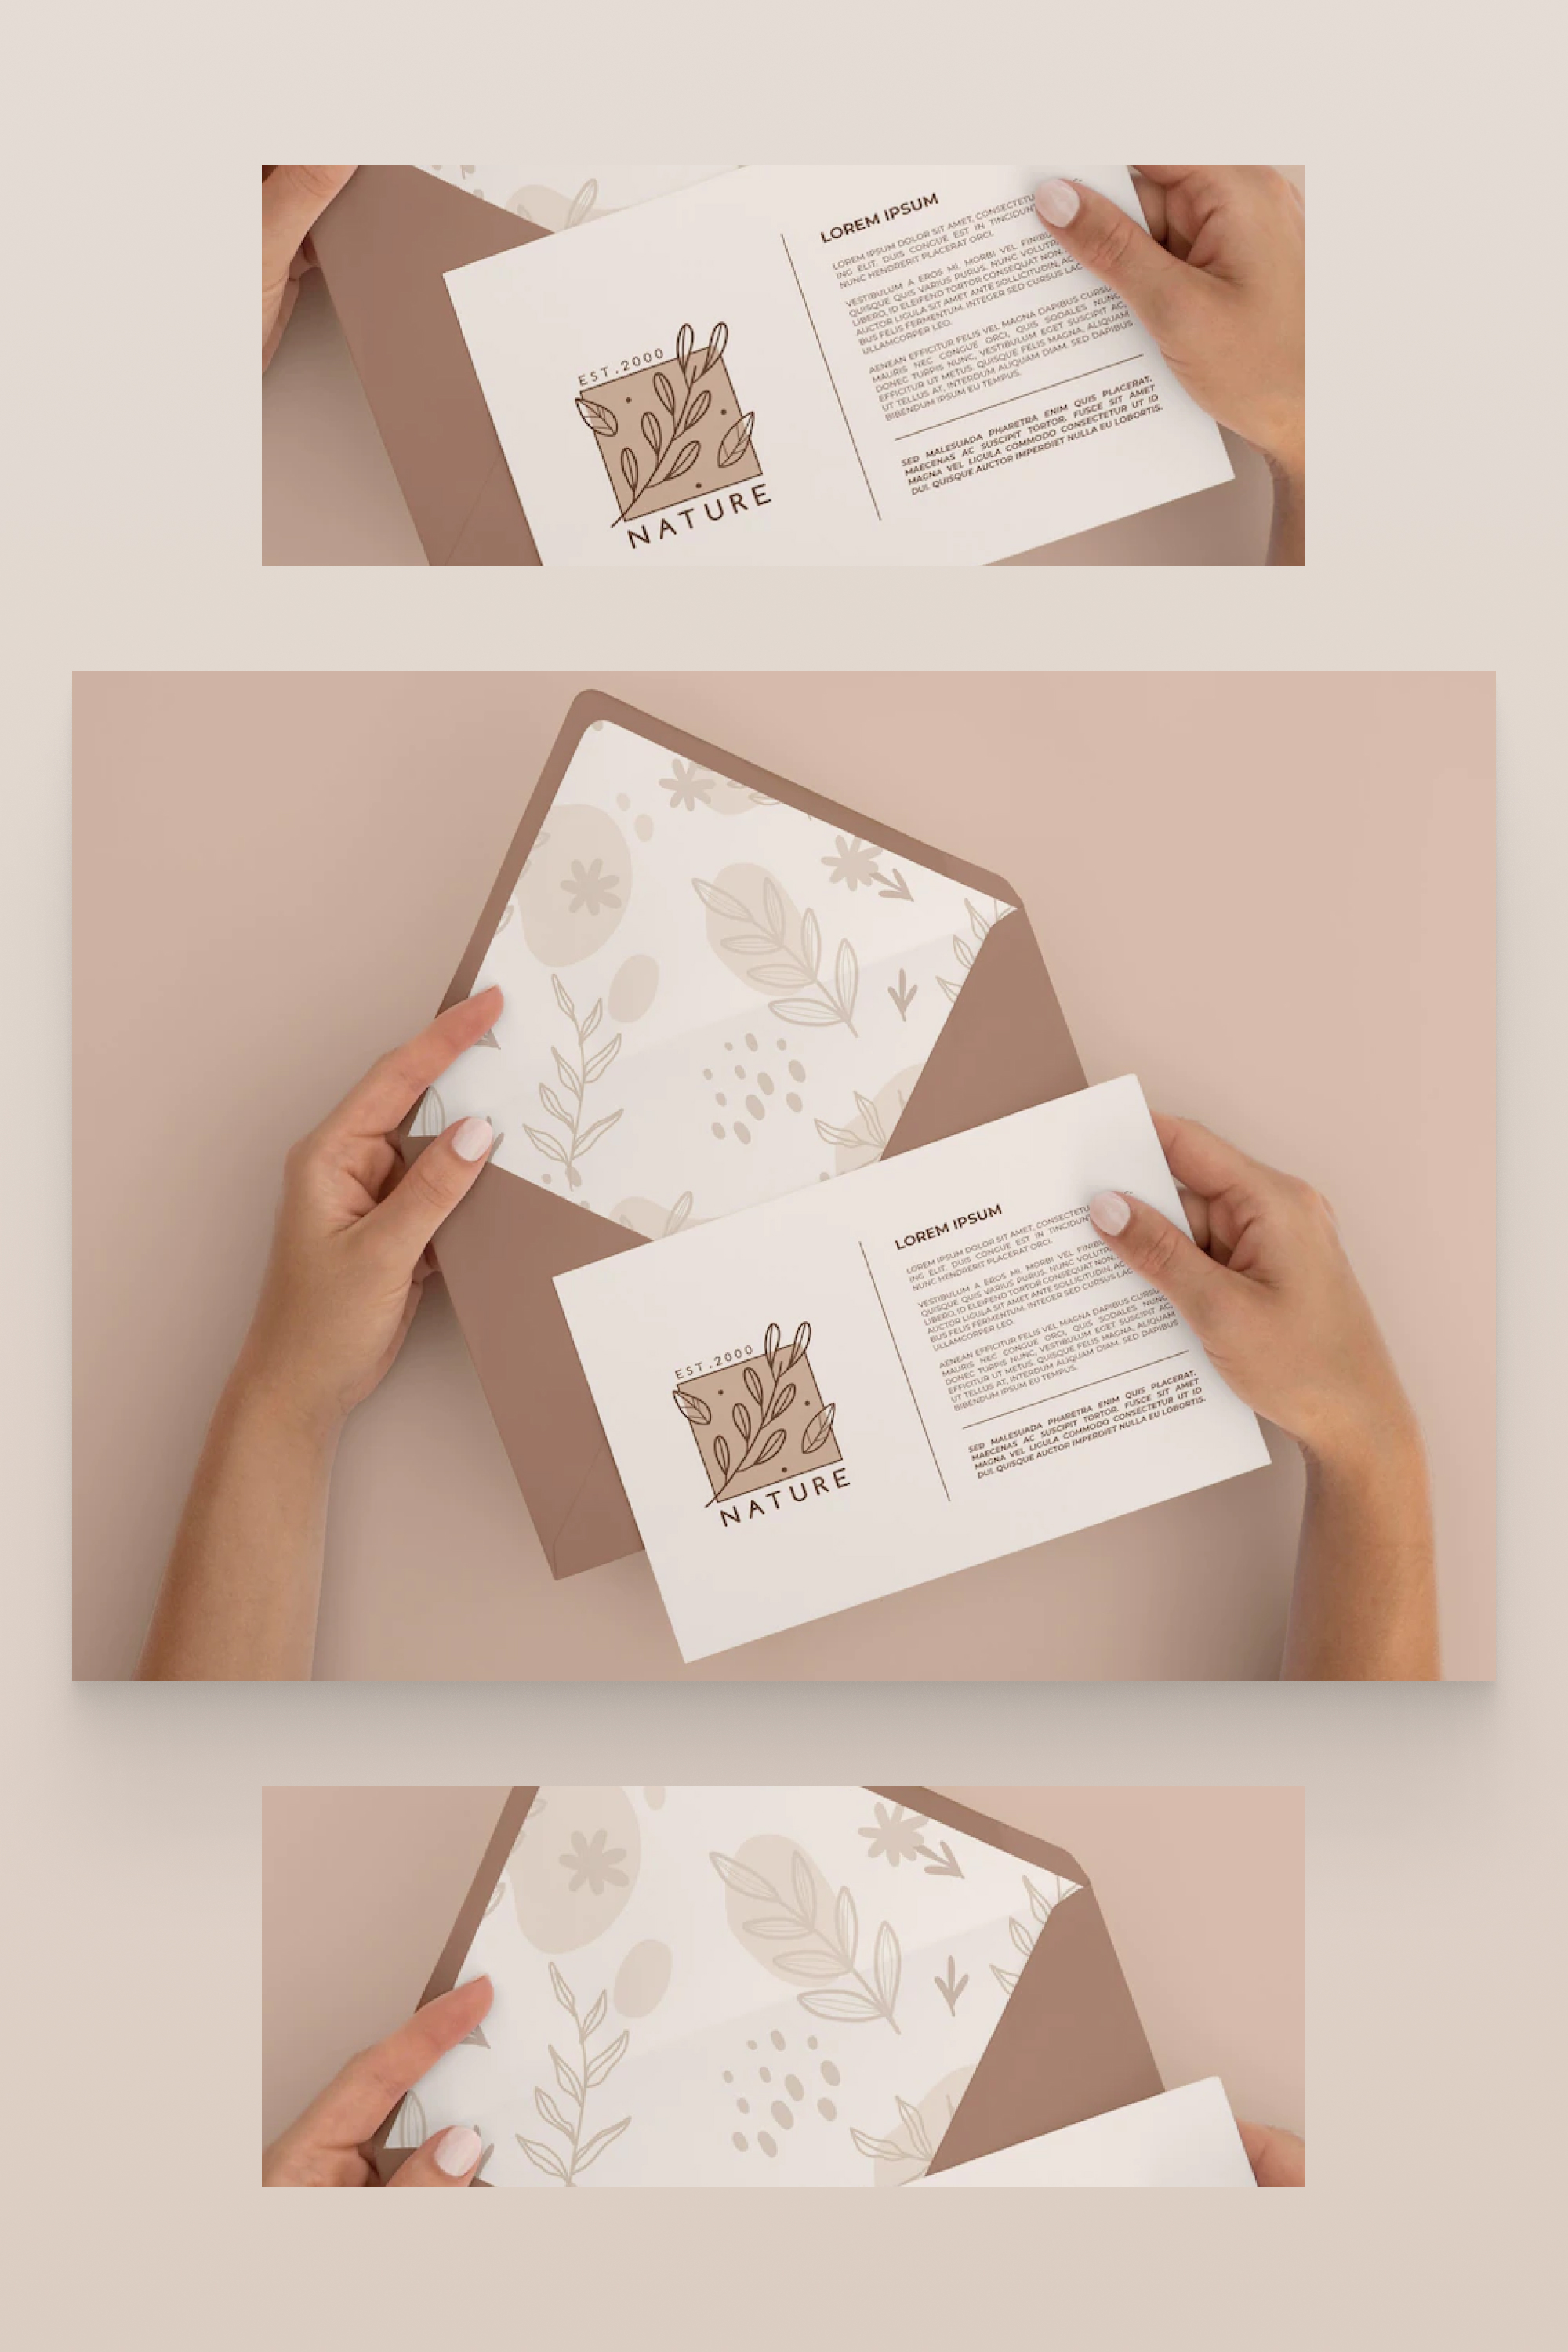 Envelope with text and flower pattern on a sheet in hands.